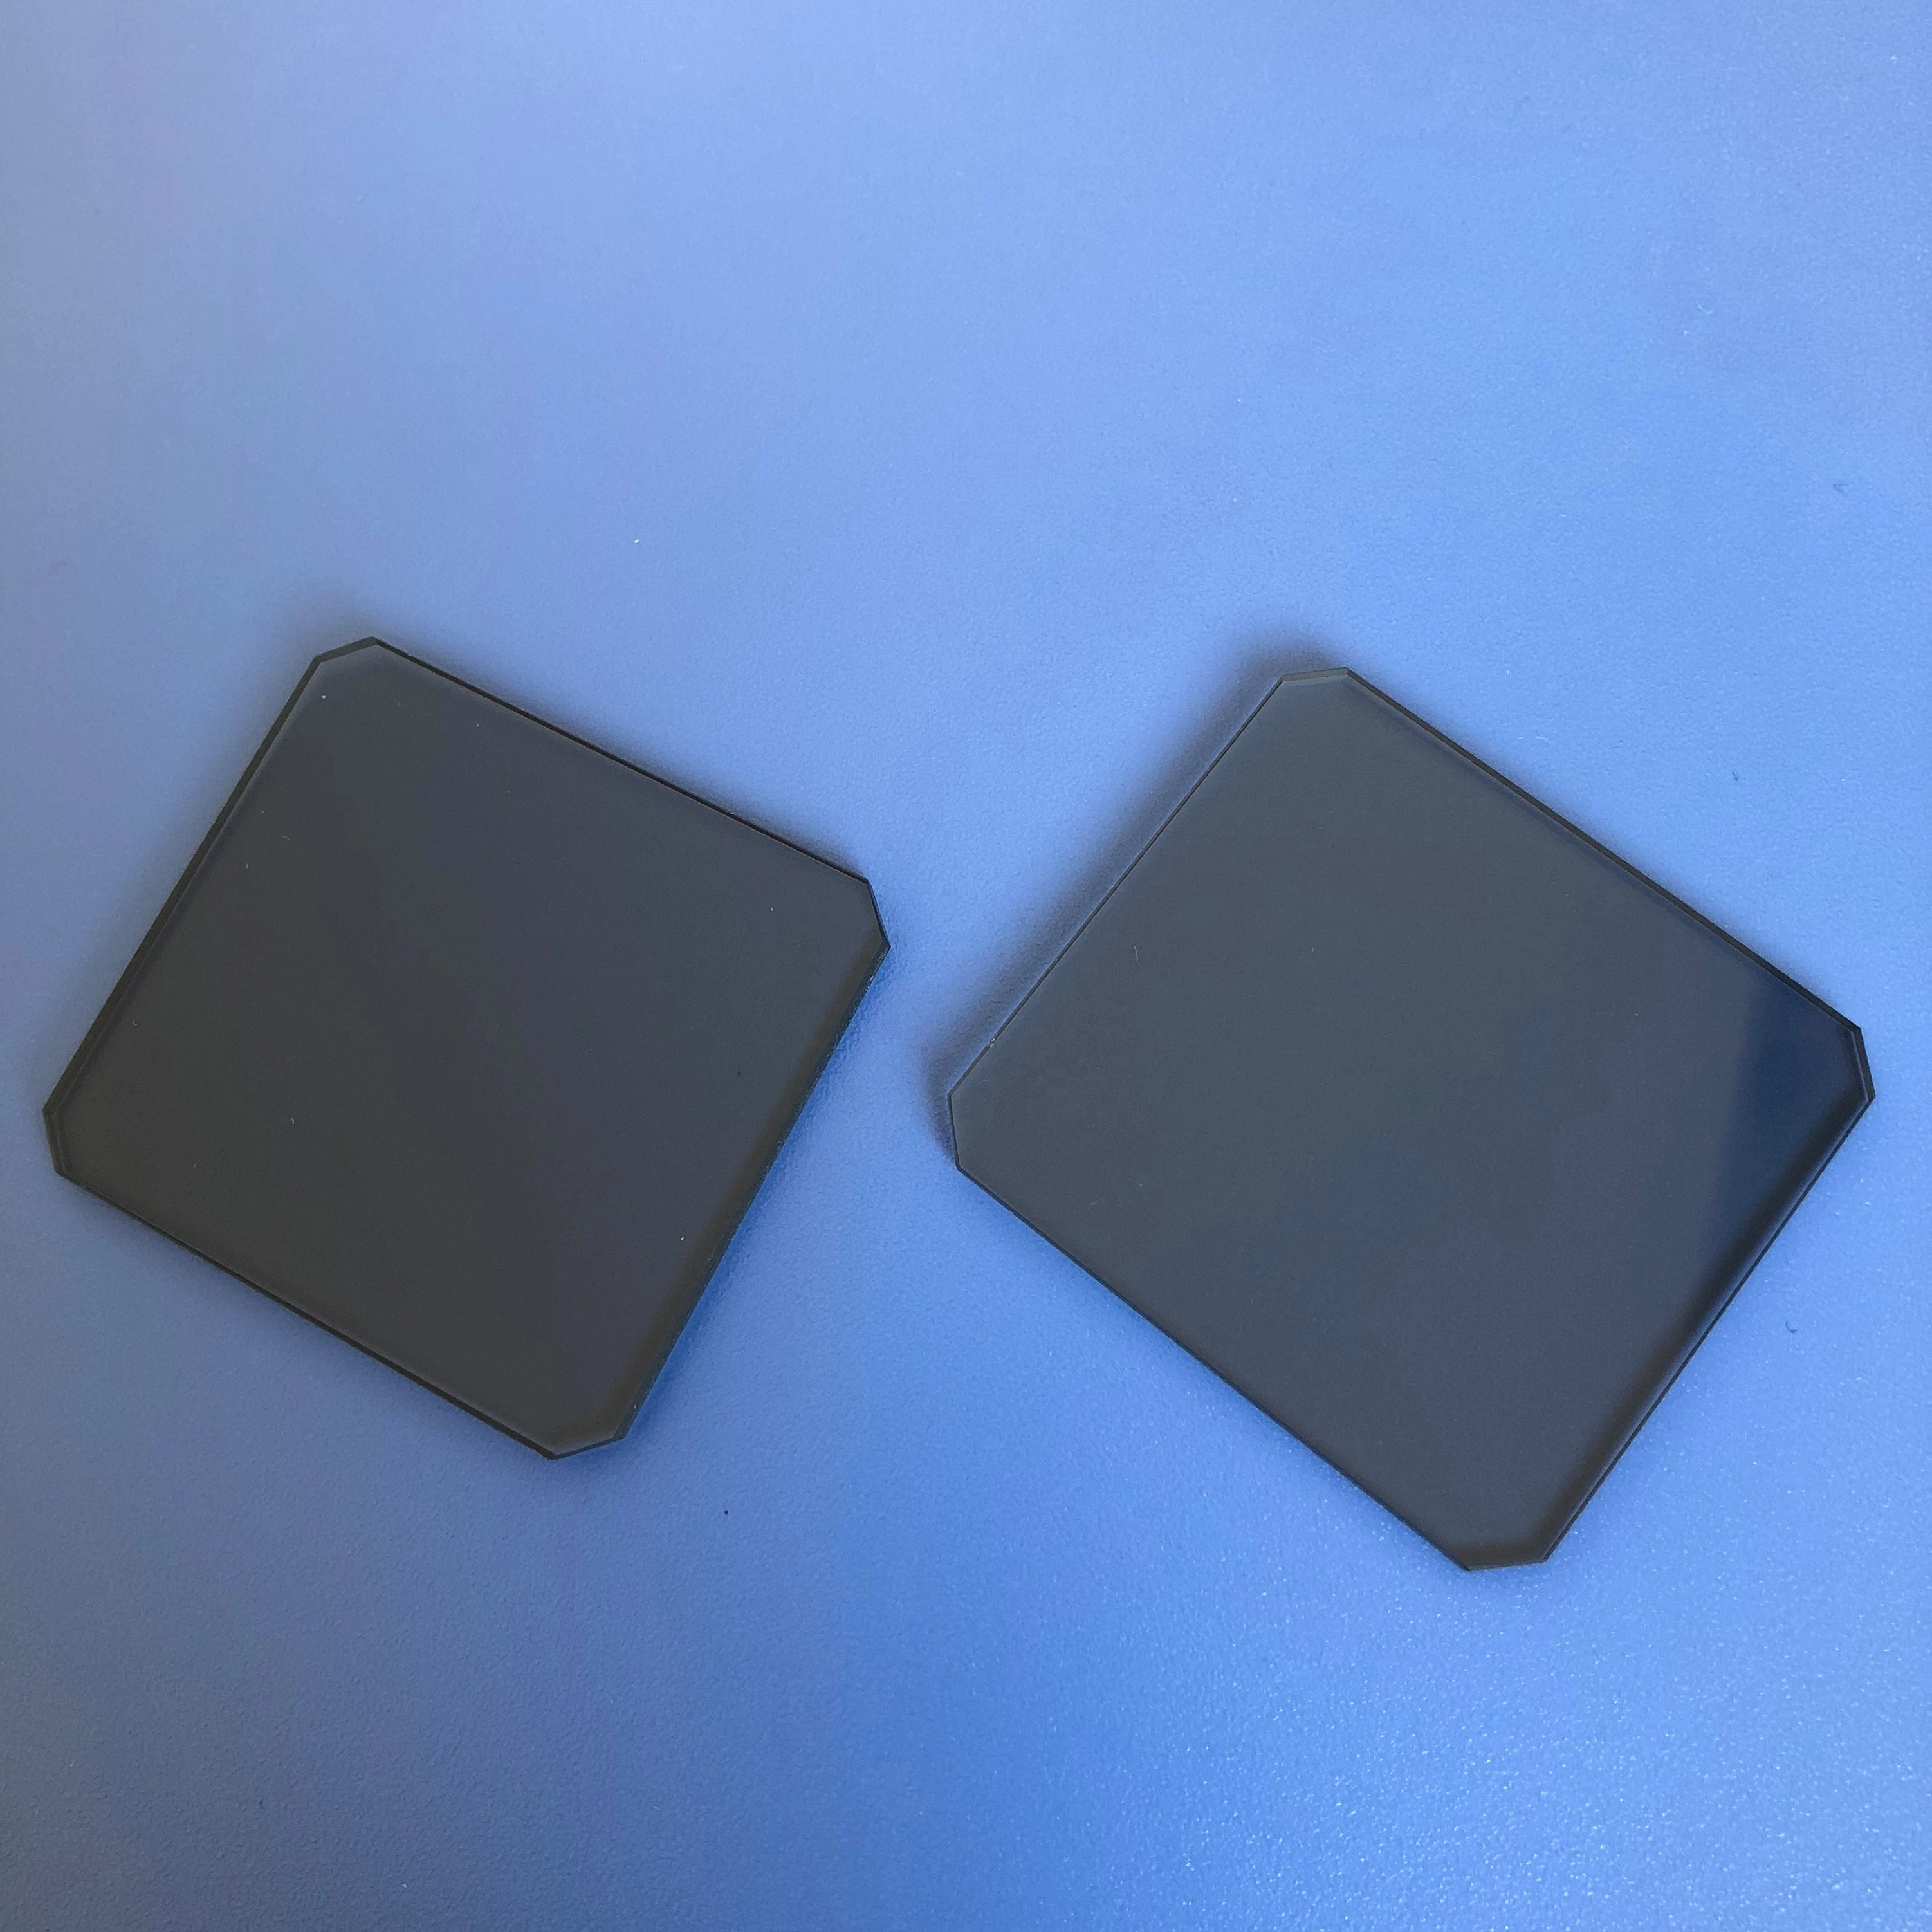 neutral density glass square nd optical filter